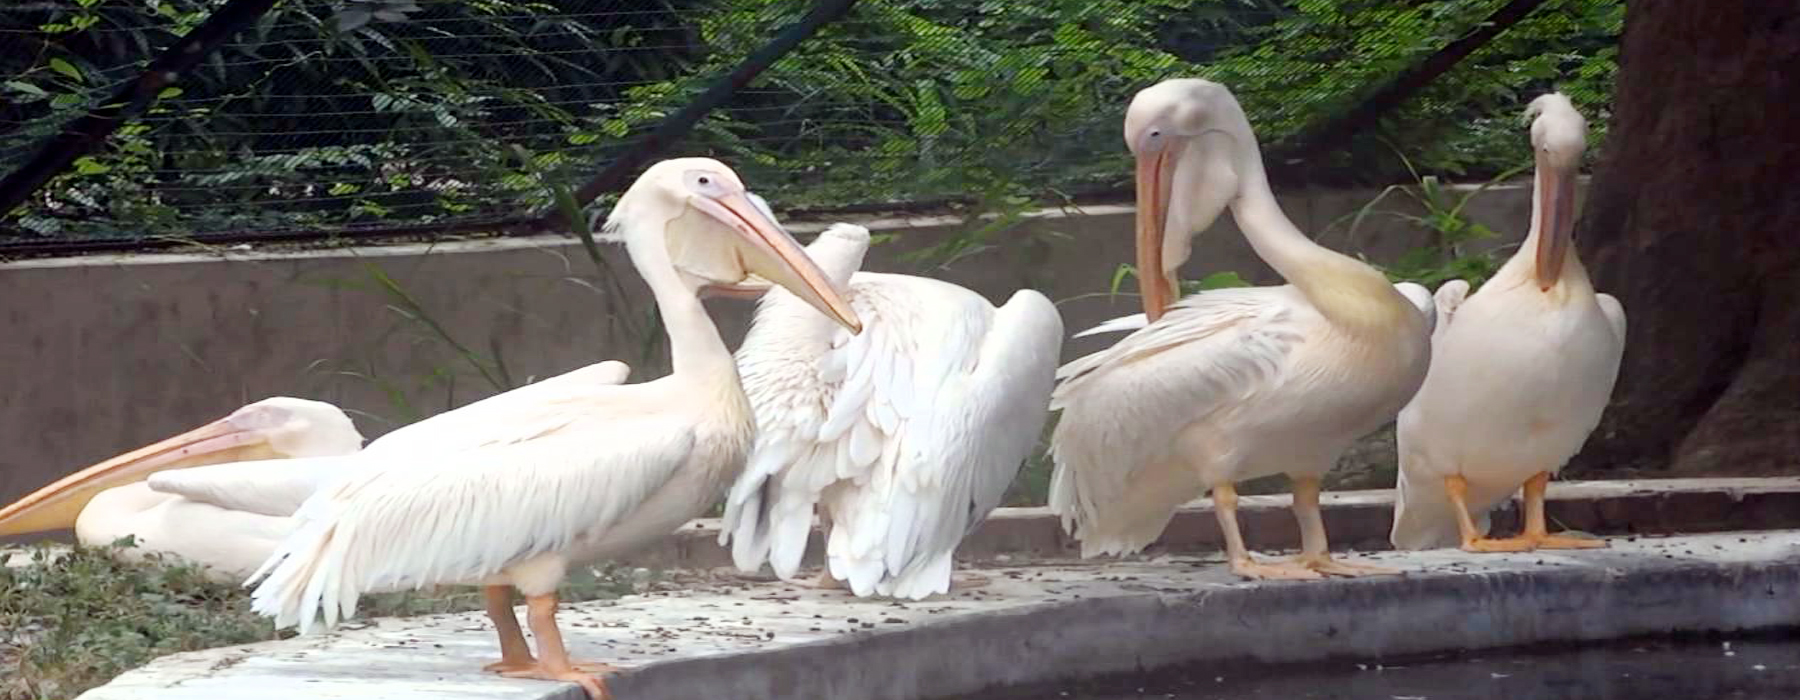 Lucknow Zoo: